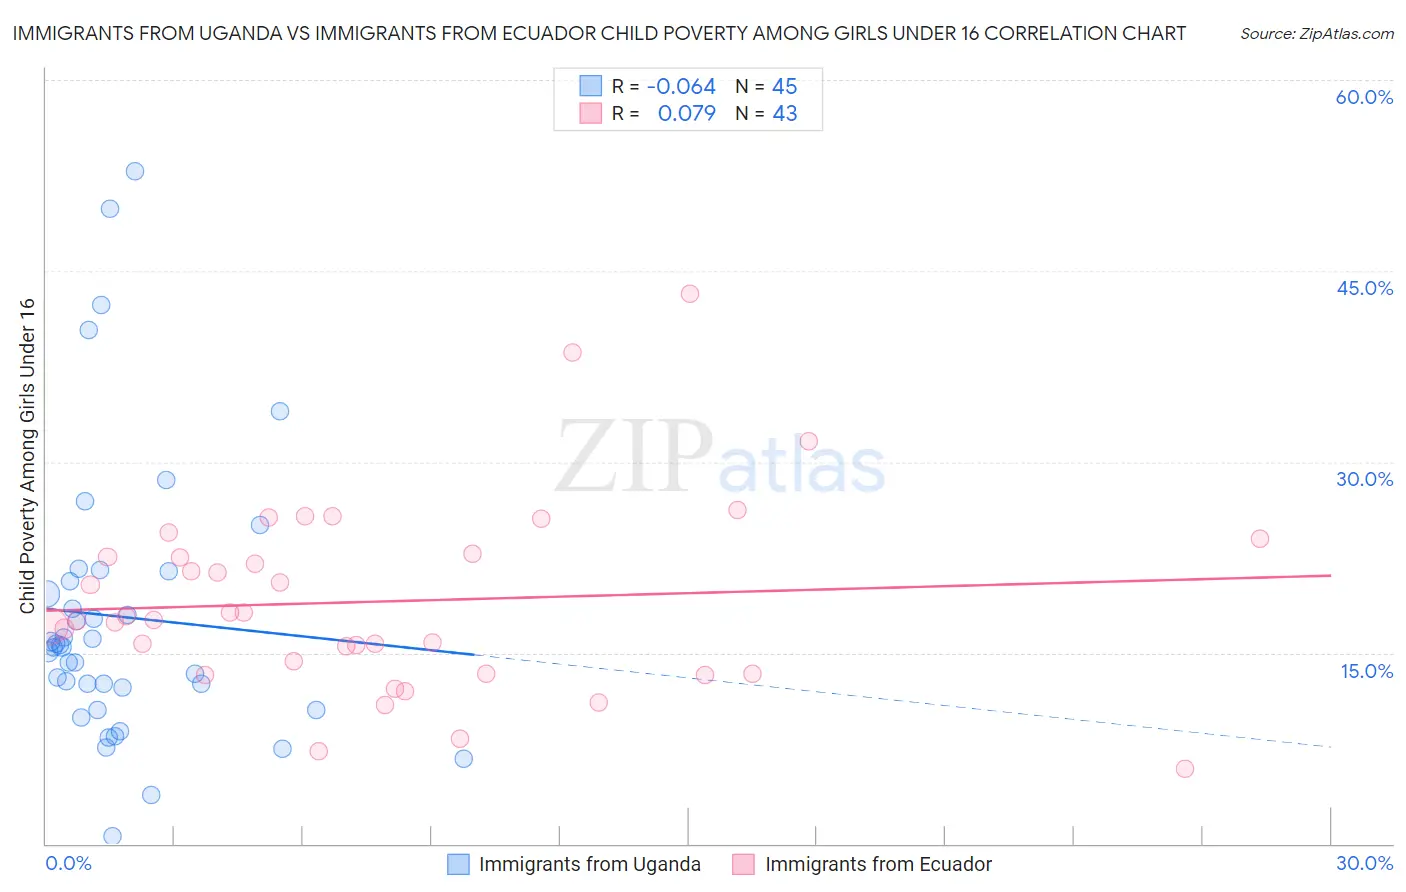 Immigrants from Uganda vs Immigrants from Ecuador Child Poverty Among Girls Under 16